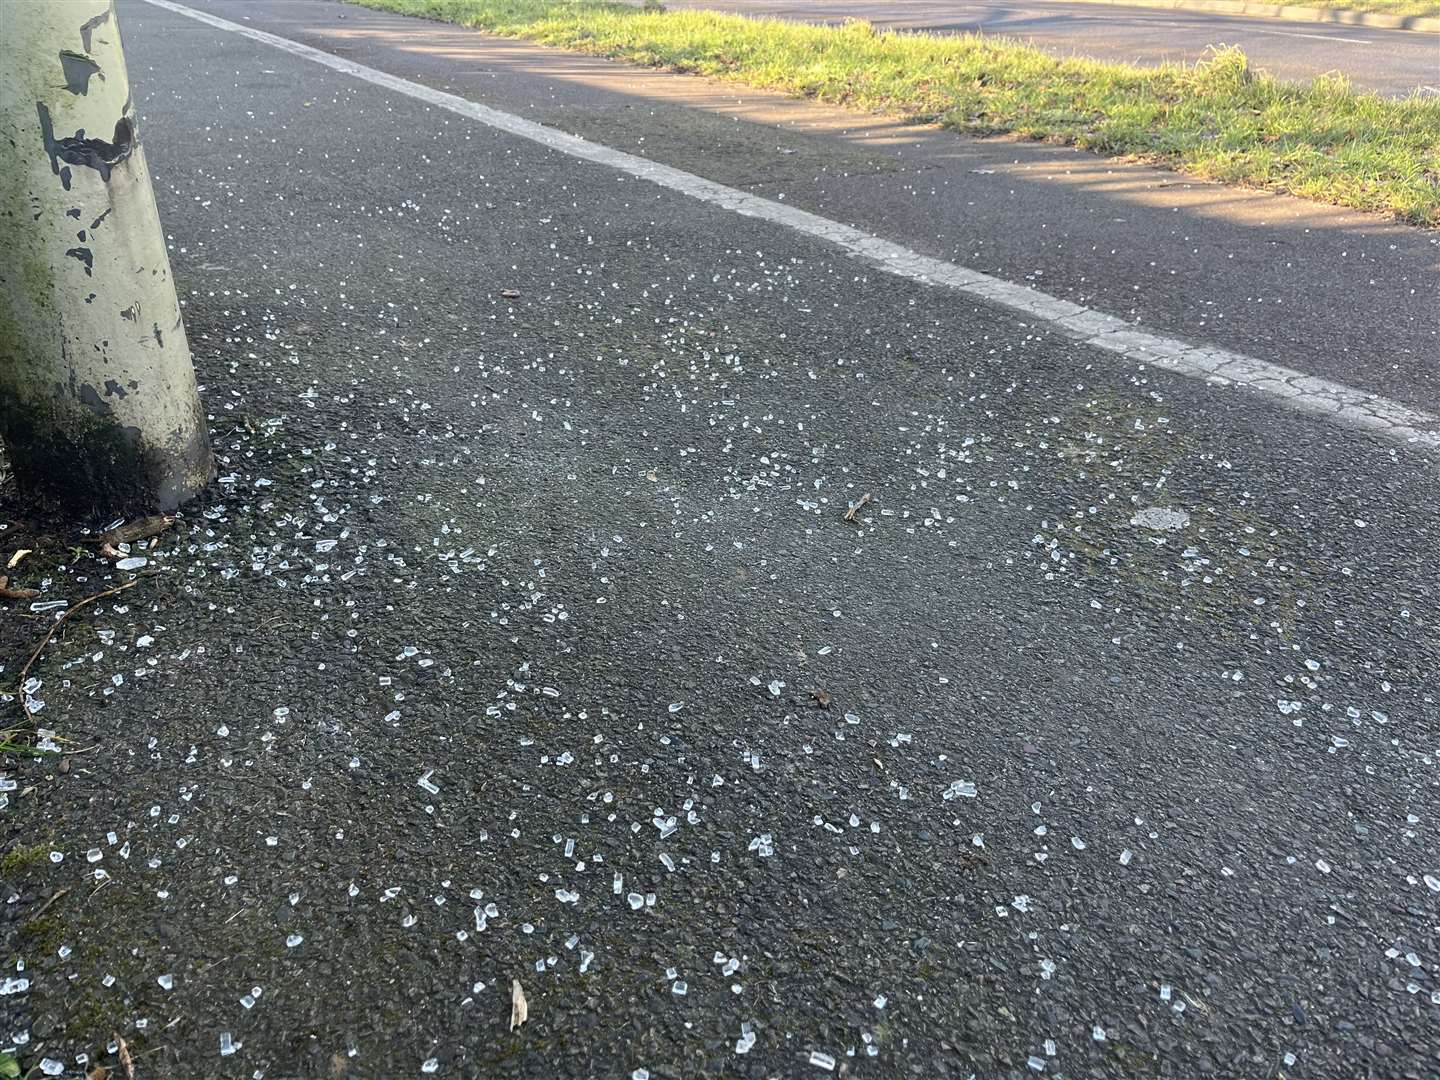 Four street lamps in Kennington were smashed last week leaving glass shards scattered on the pavement along Trinity Road